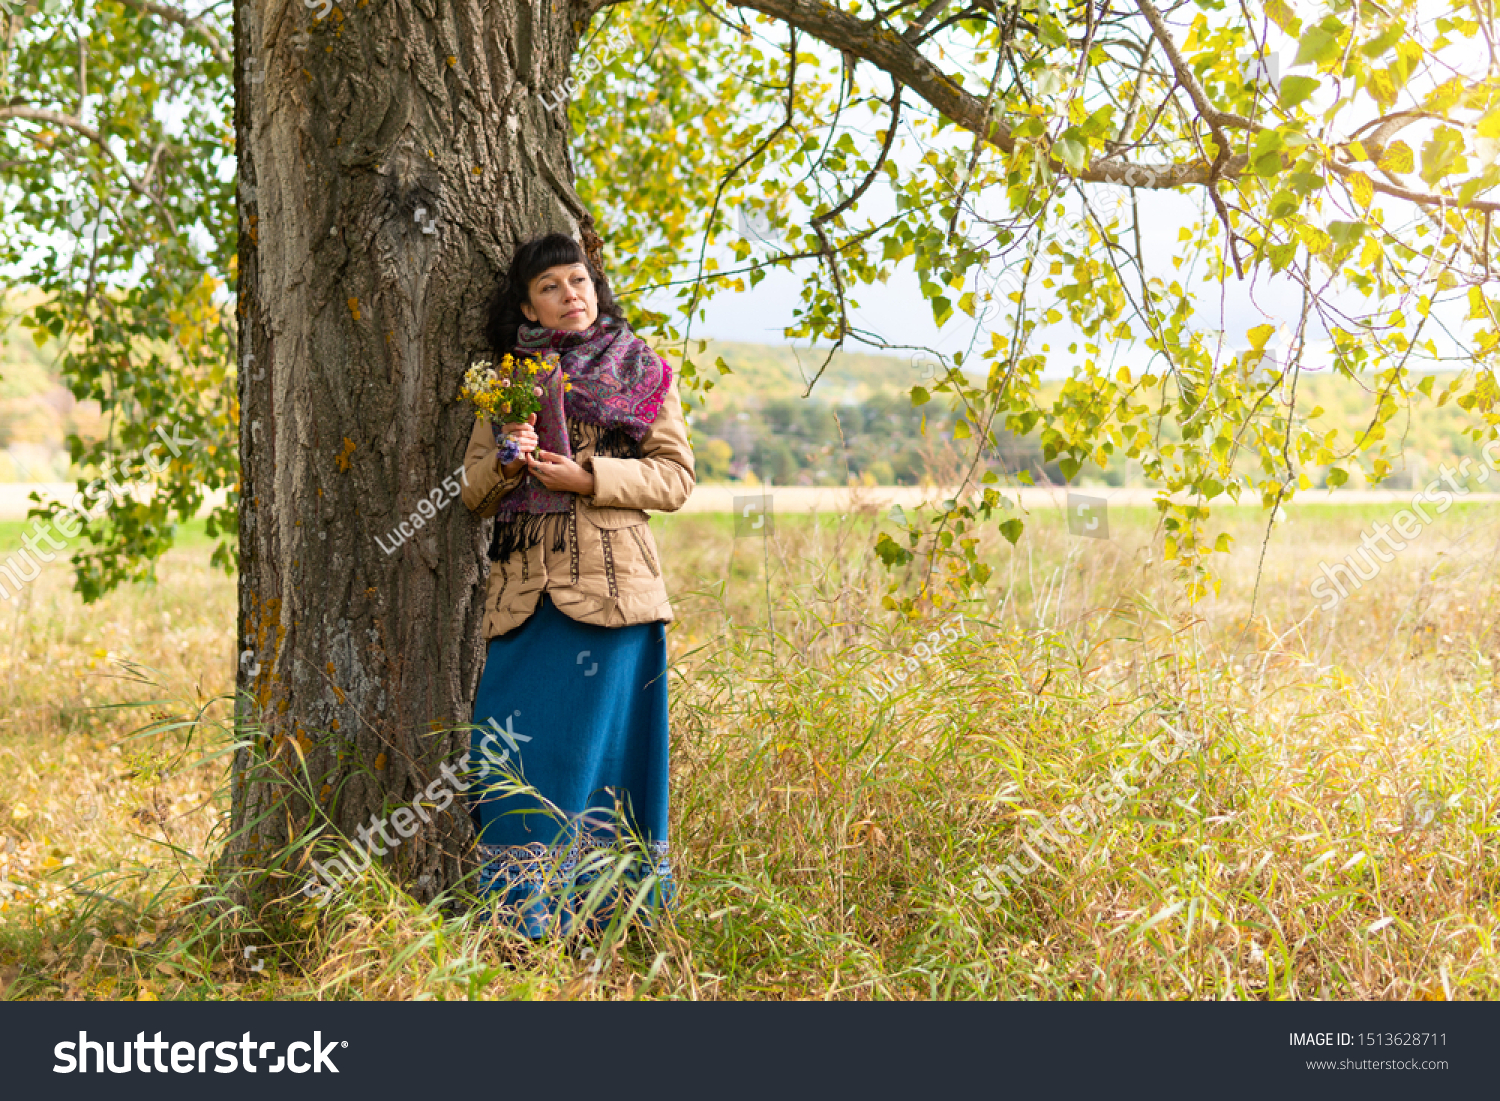 Beautiful woman standing under a tree in a Park in nature. She holds flowers in her hands. Autumn. #1513628711